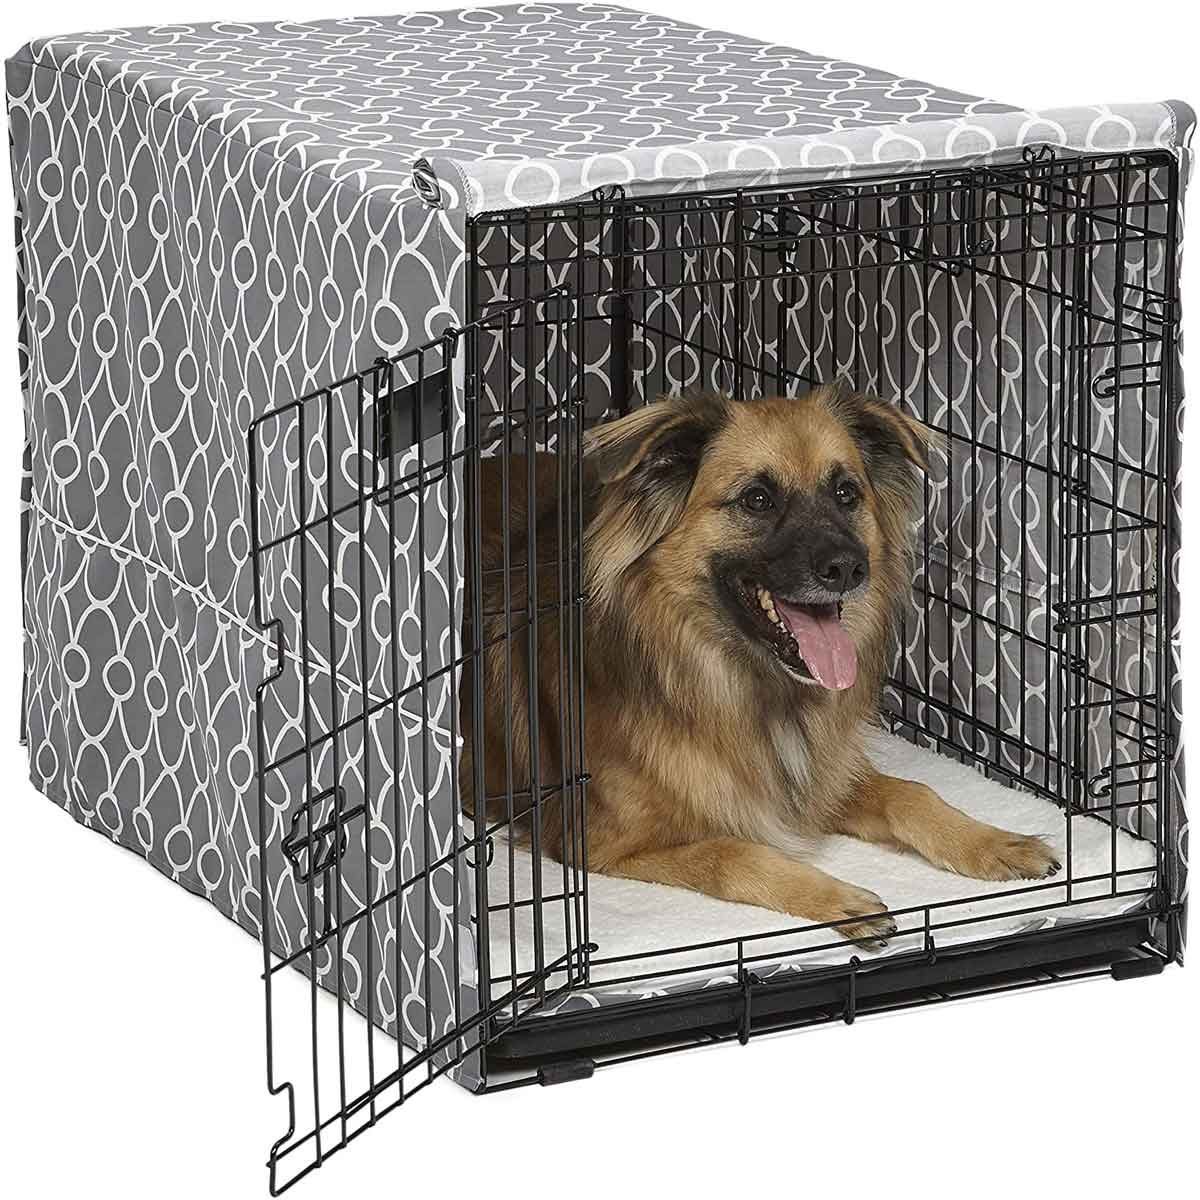 https://www.familyhandyman.com/wp-content/uploads/2020/10/crate-cover-A1LHajIE09L._AC_SL1500_.jpg